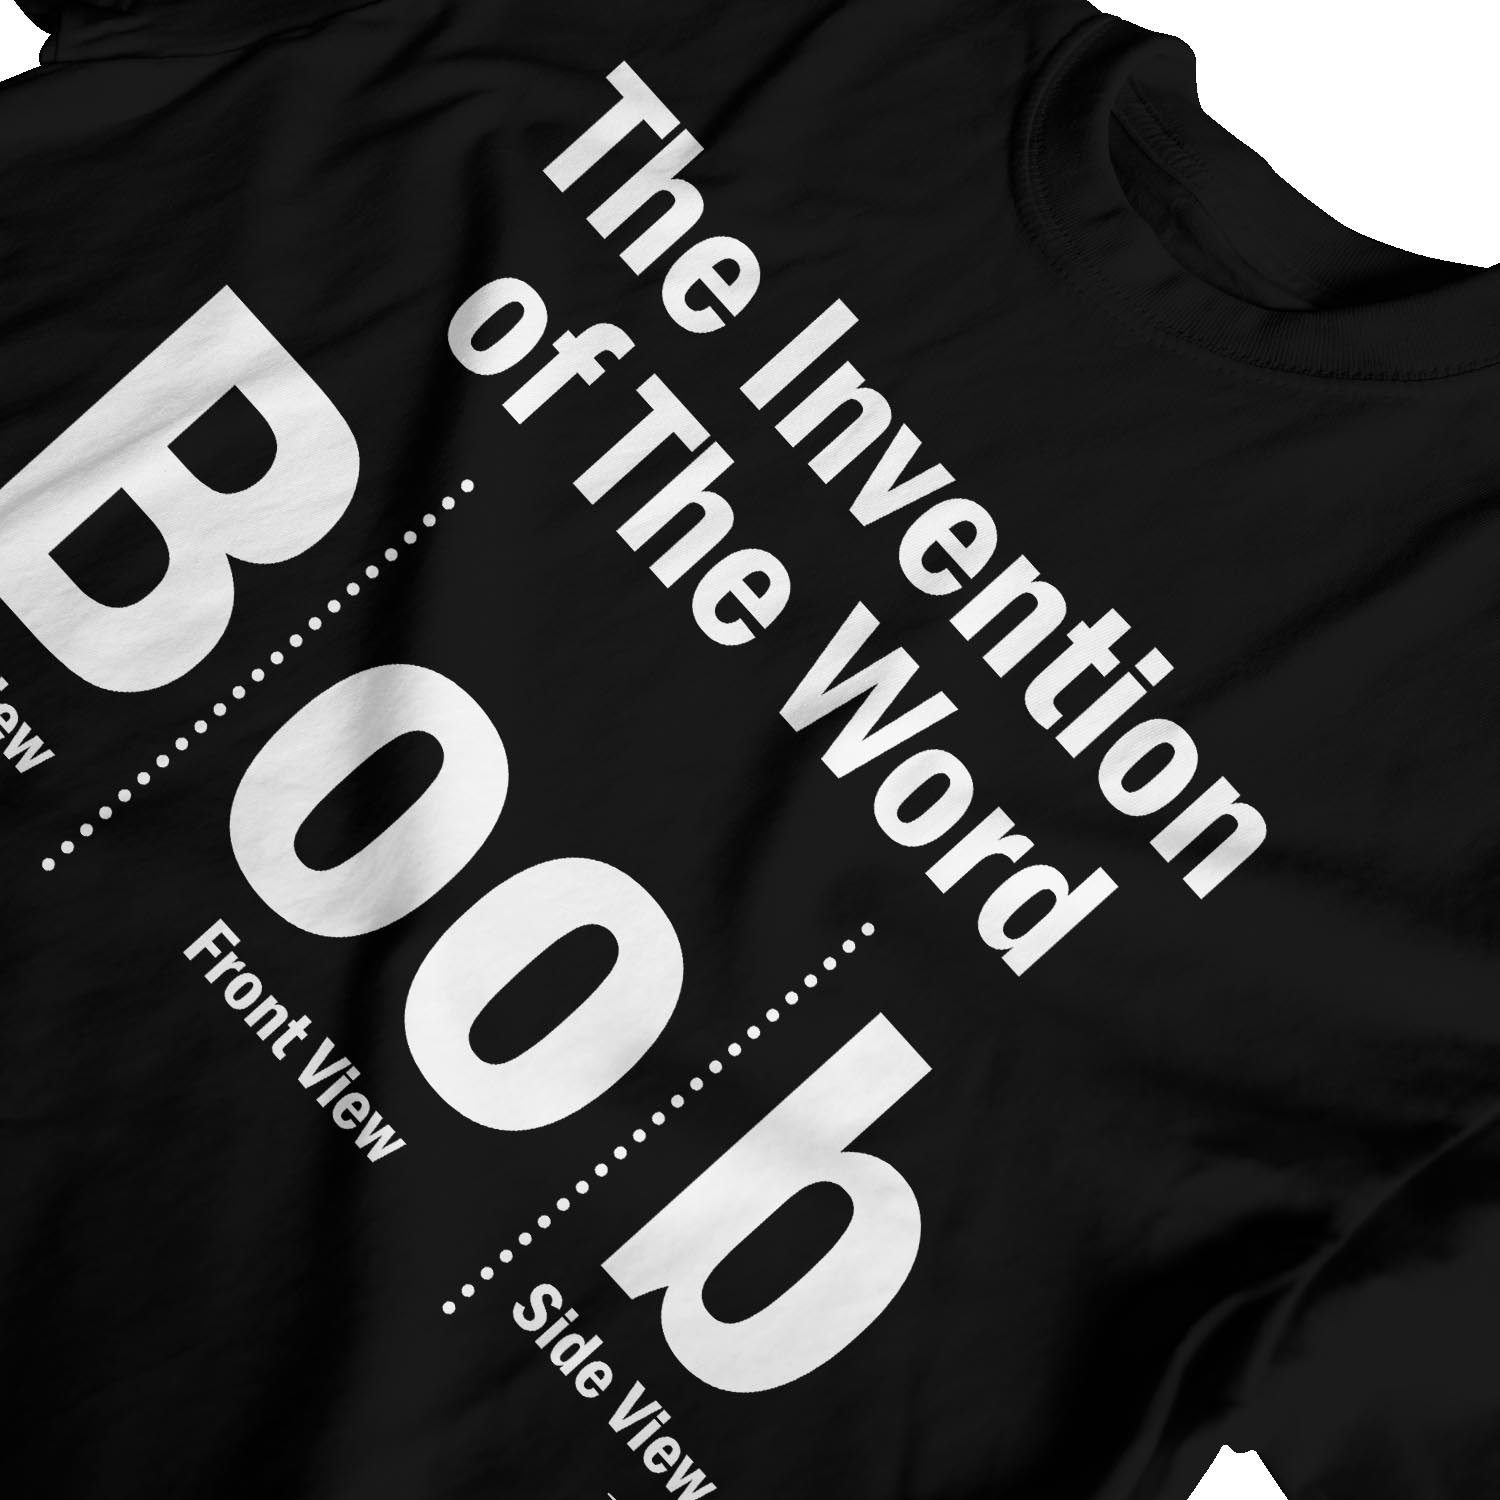 The Invention Of The Word Boob Tee T-Shirt - Yumtshirt